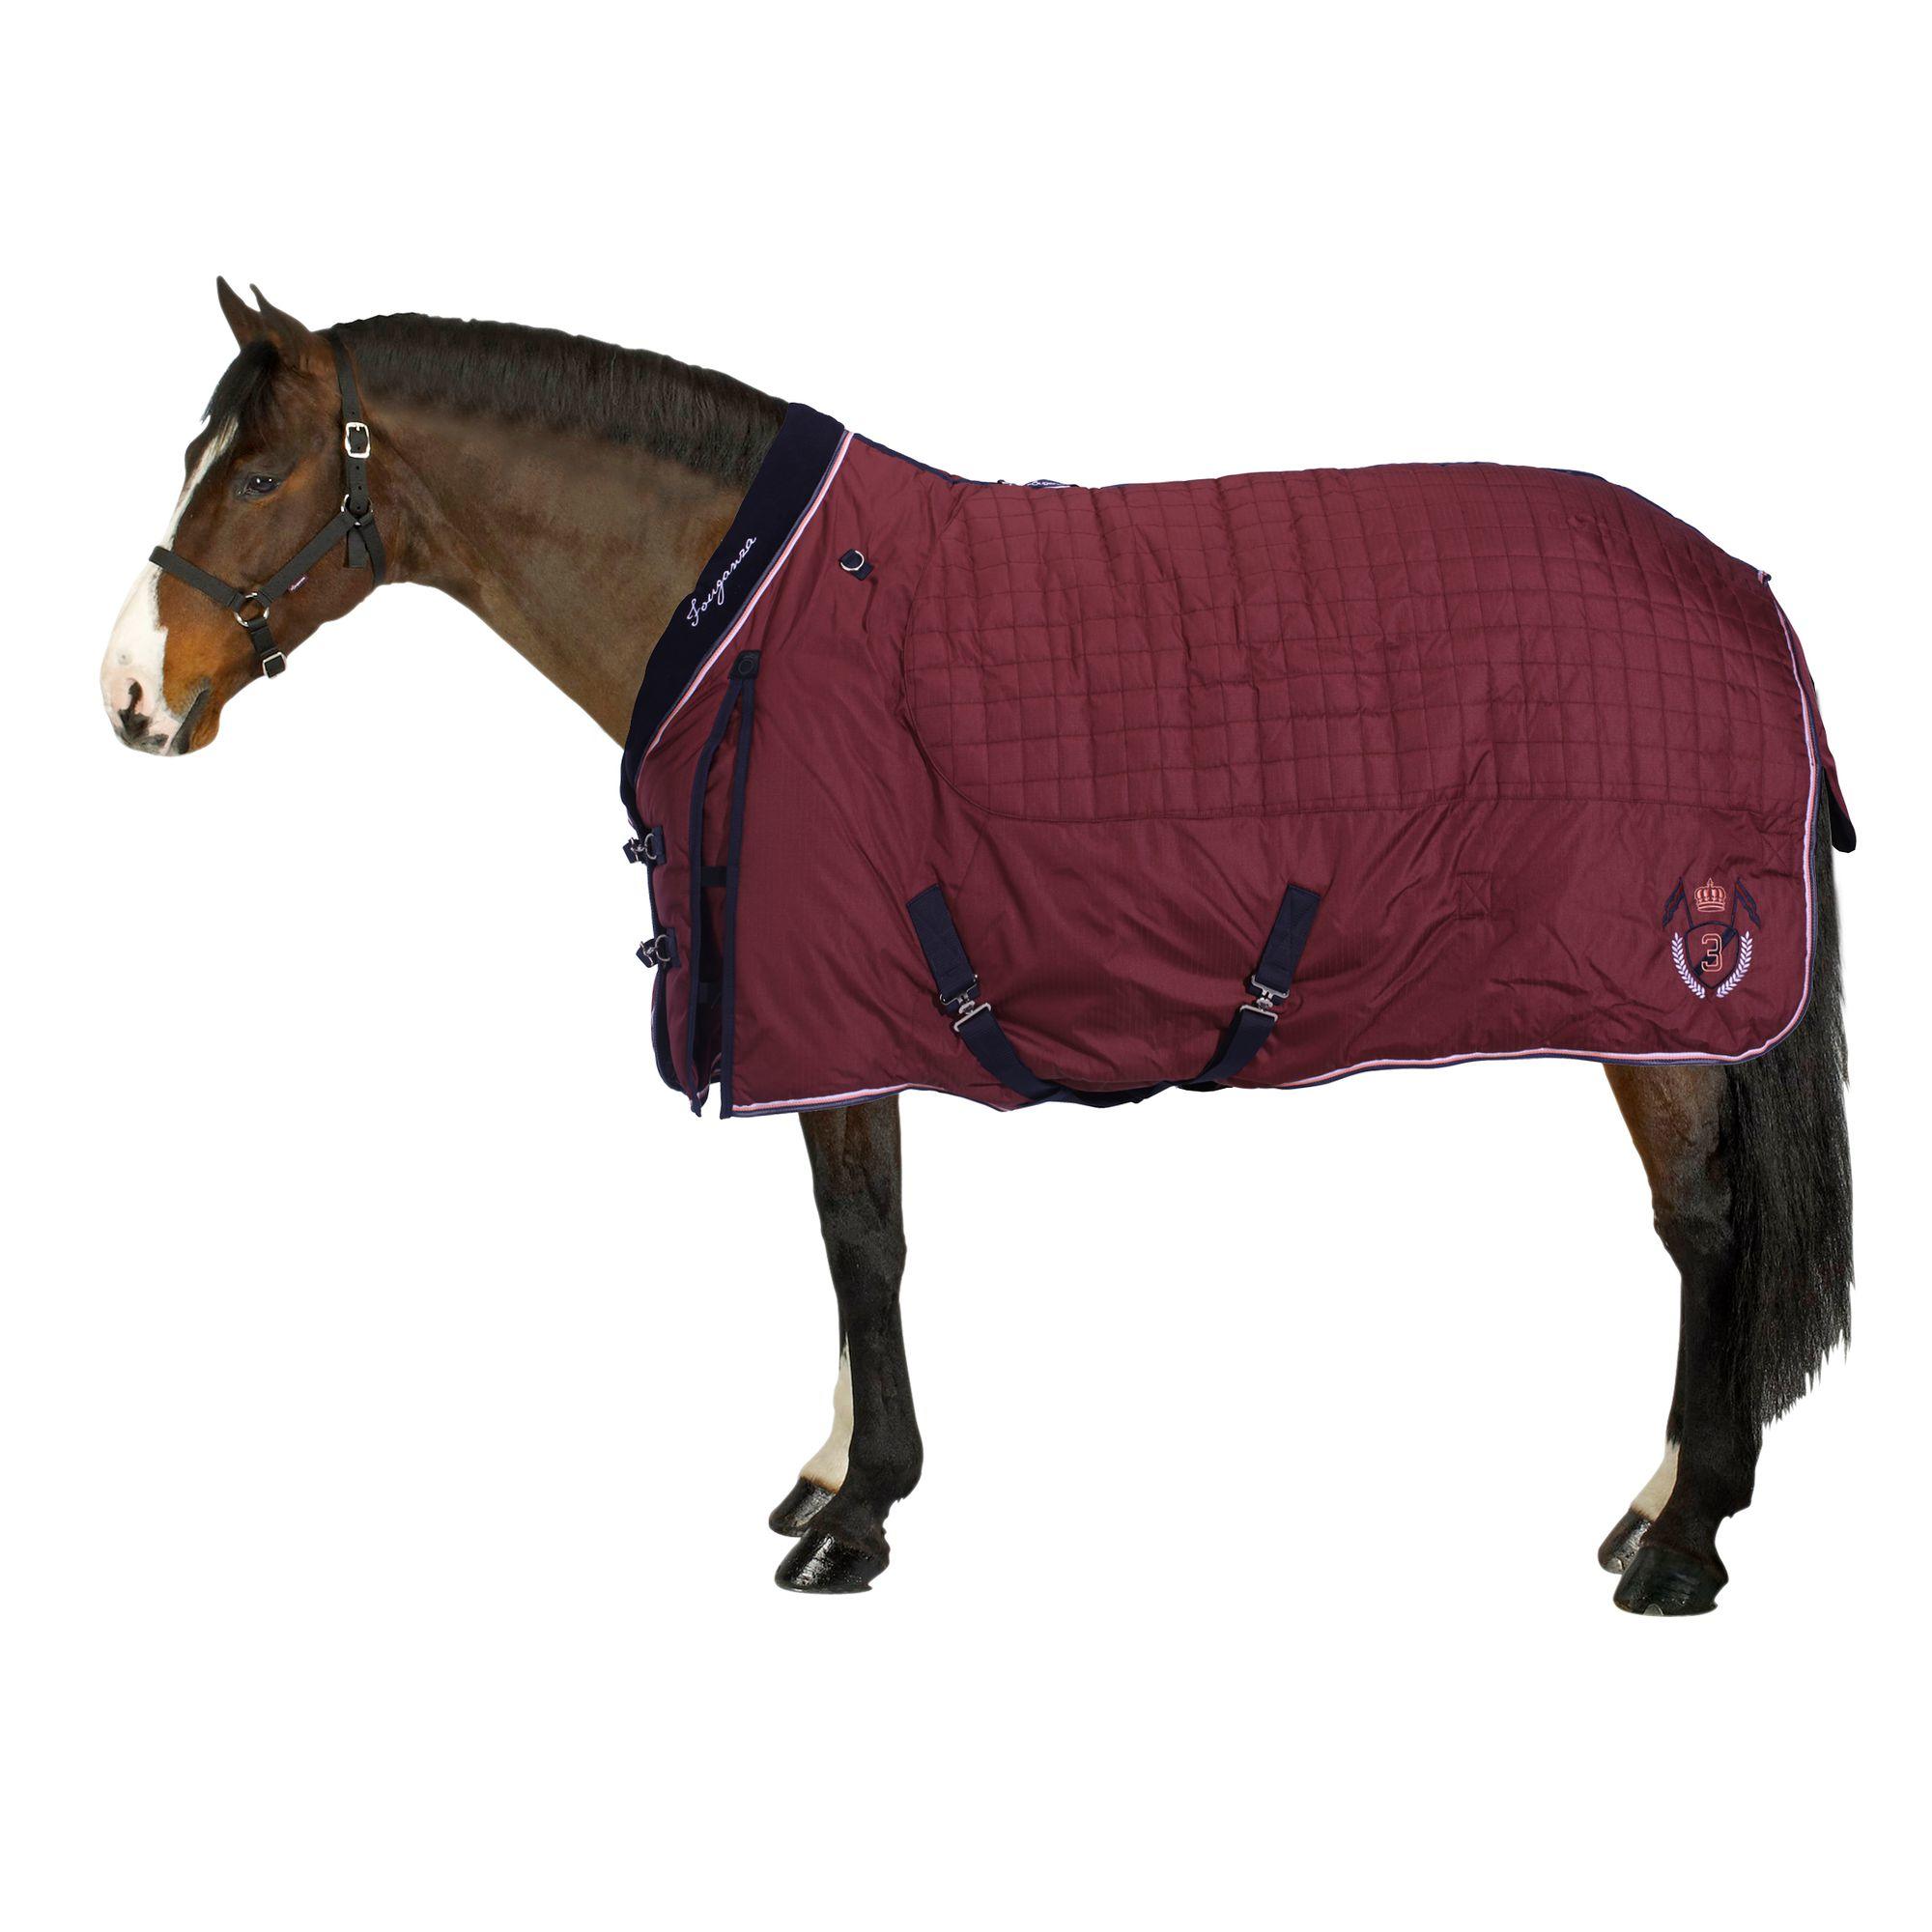 FOUGANZA Stable 400 Horse Riding Stable Rug for Horse and Pony - Burgundy